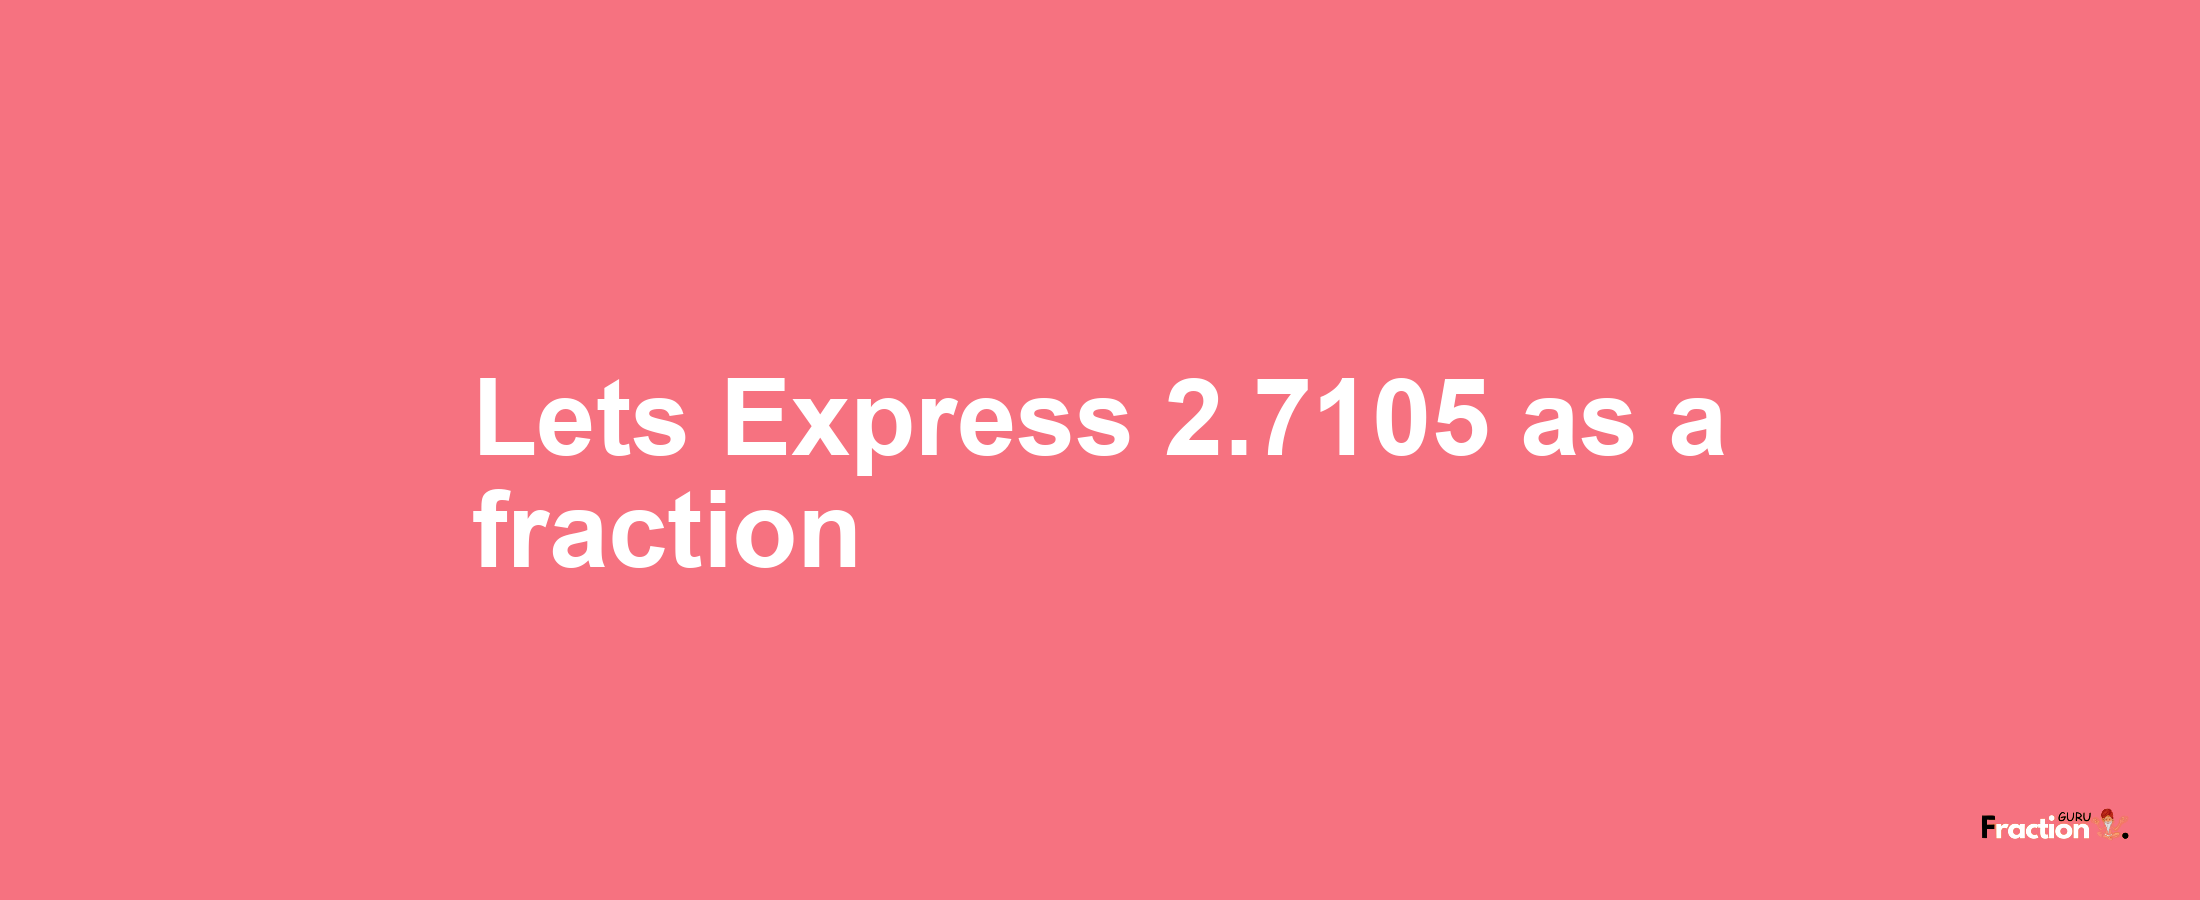 Lets Express 2.7105 as afraction